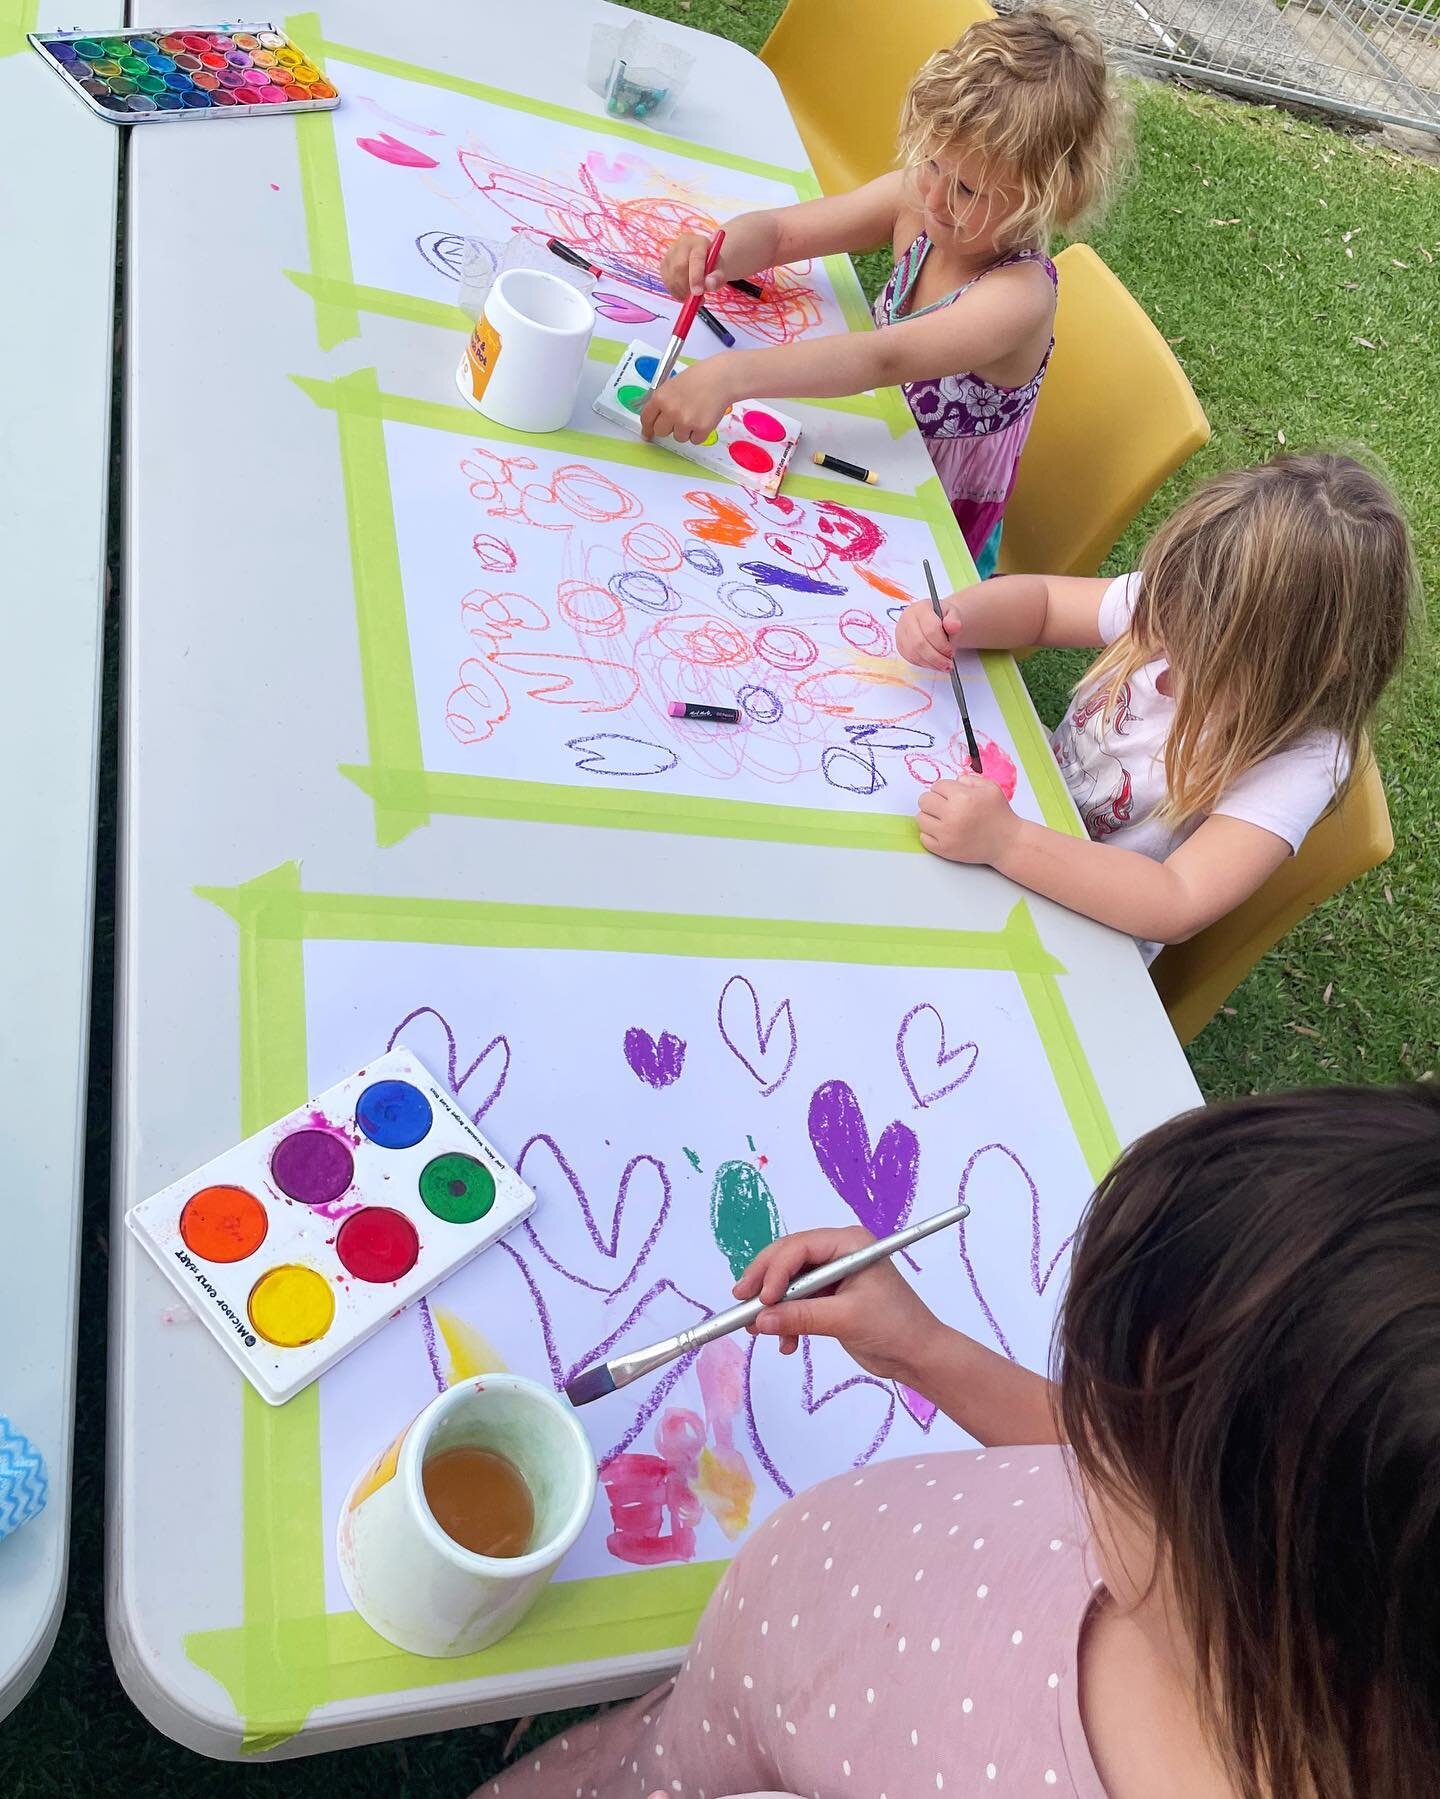 🎶Musical Chairs Art🎨

Thank you @snoopdogg for inspiring today's Messy Art Preschool! 😂

If you haven&rsquo;t heard his new kid's album @doggyland_kids it&rsquo;s pretty awesome! 

✨Affirmation Song is 🔥

If you want to see my sweet dance moves a